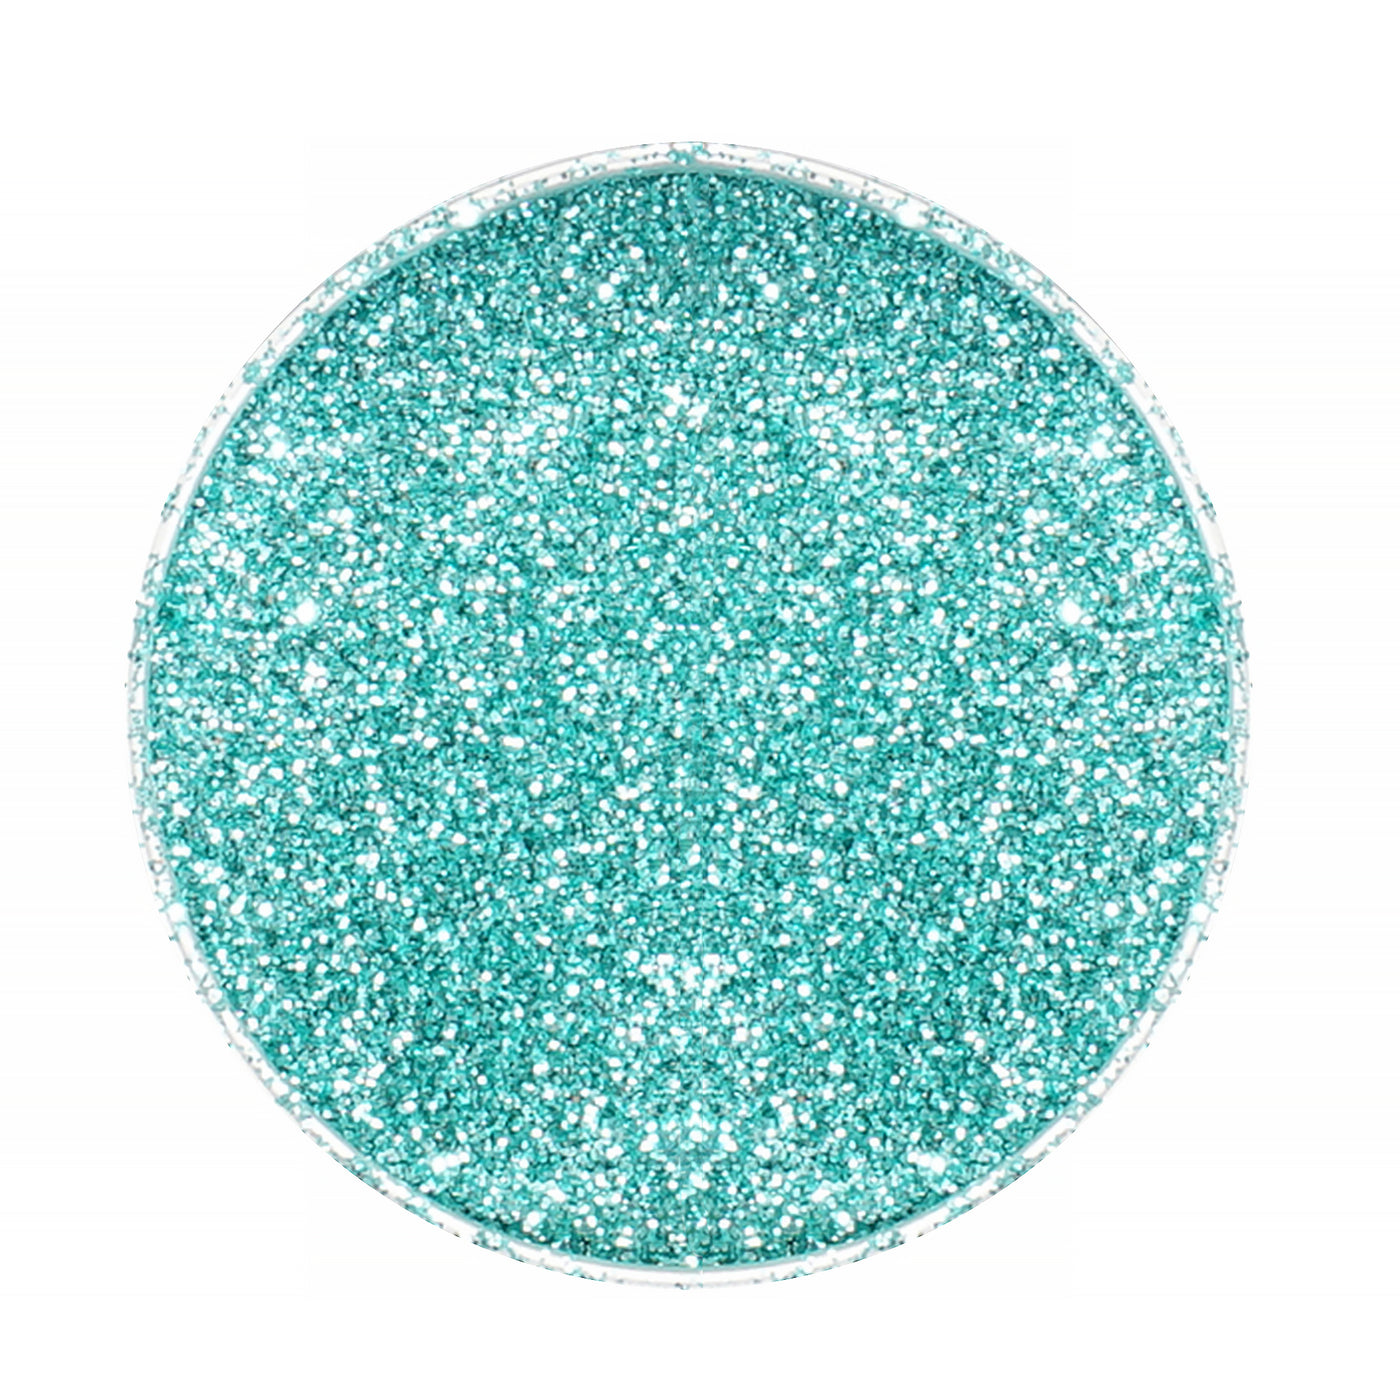 Turquoise Biodegradable Cosmetic Glitter